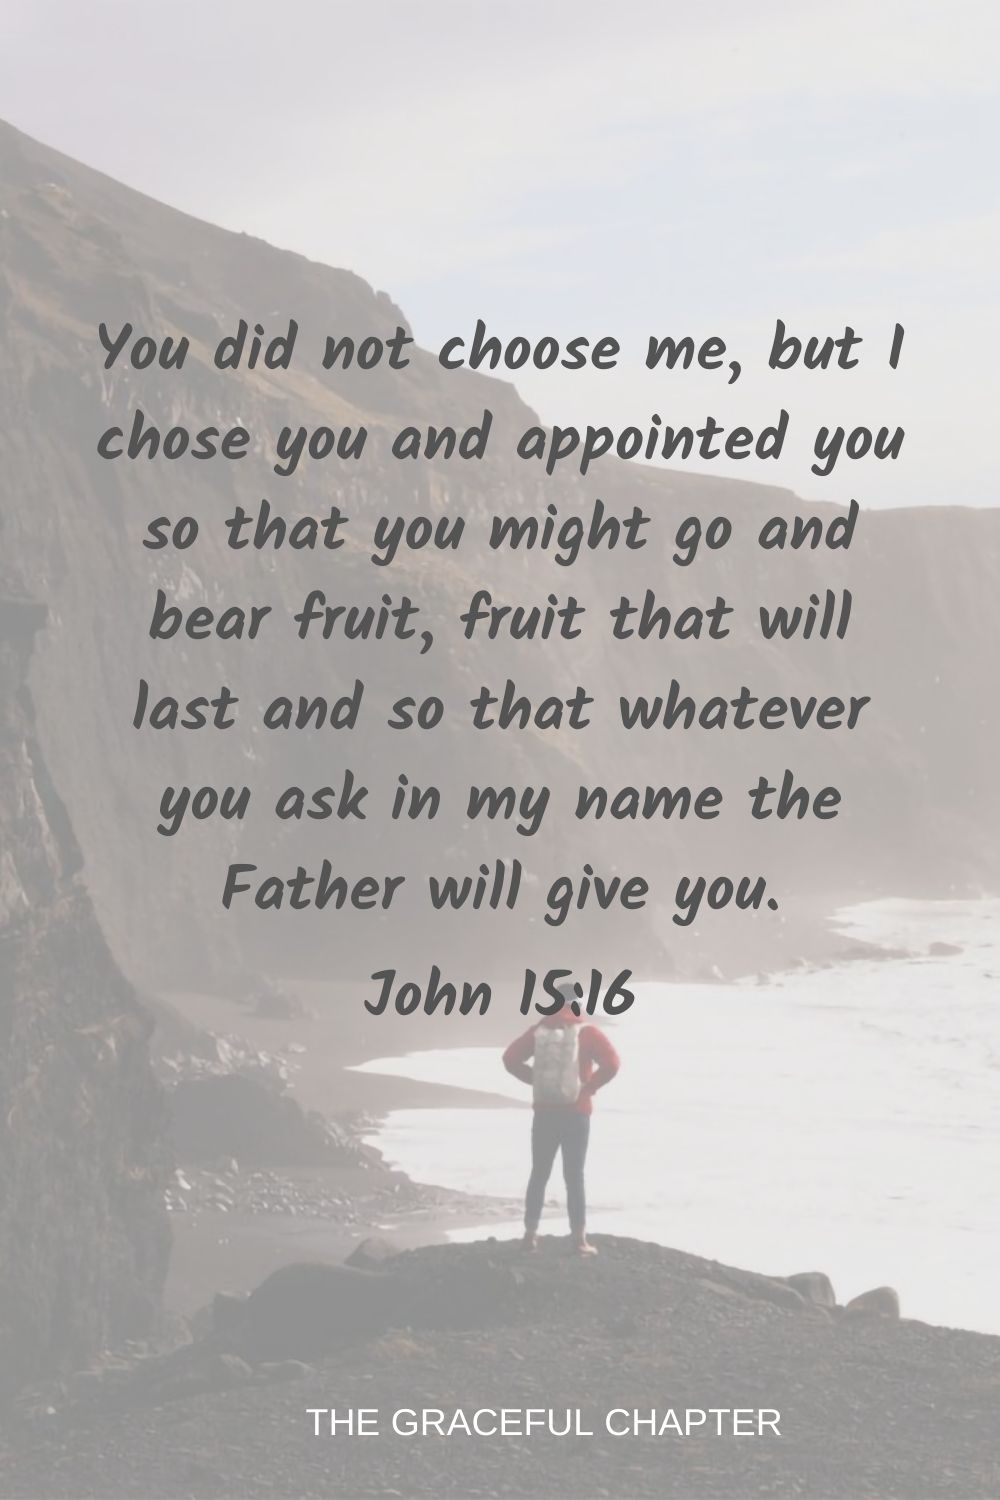 You did not choose me, but I chose you and appointed you so that you might go and bear fruit, fruit that will last and so that whatever you ask in my name the Father will give you. John 15:16